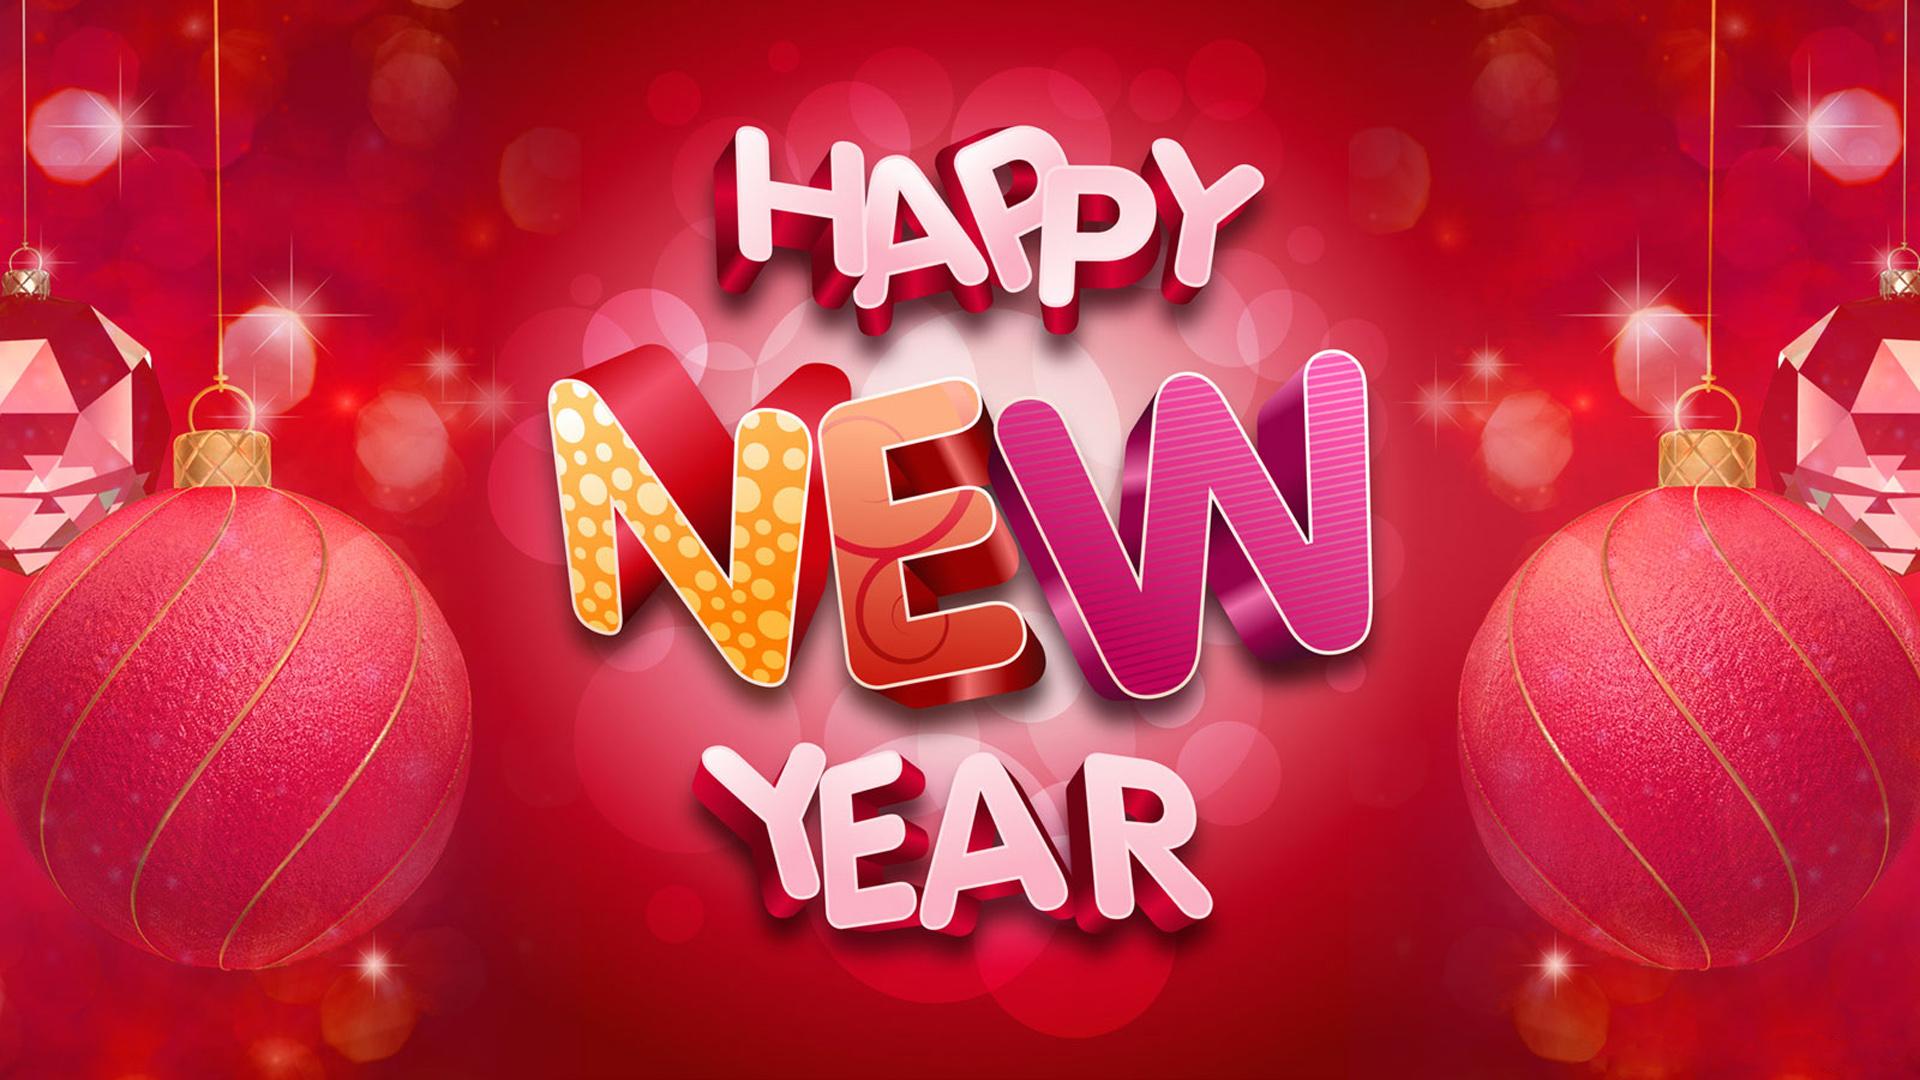 Happy New Year 2020 Greetings Cards Sms Image In Advance